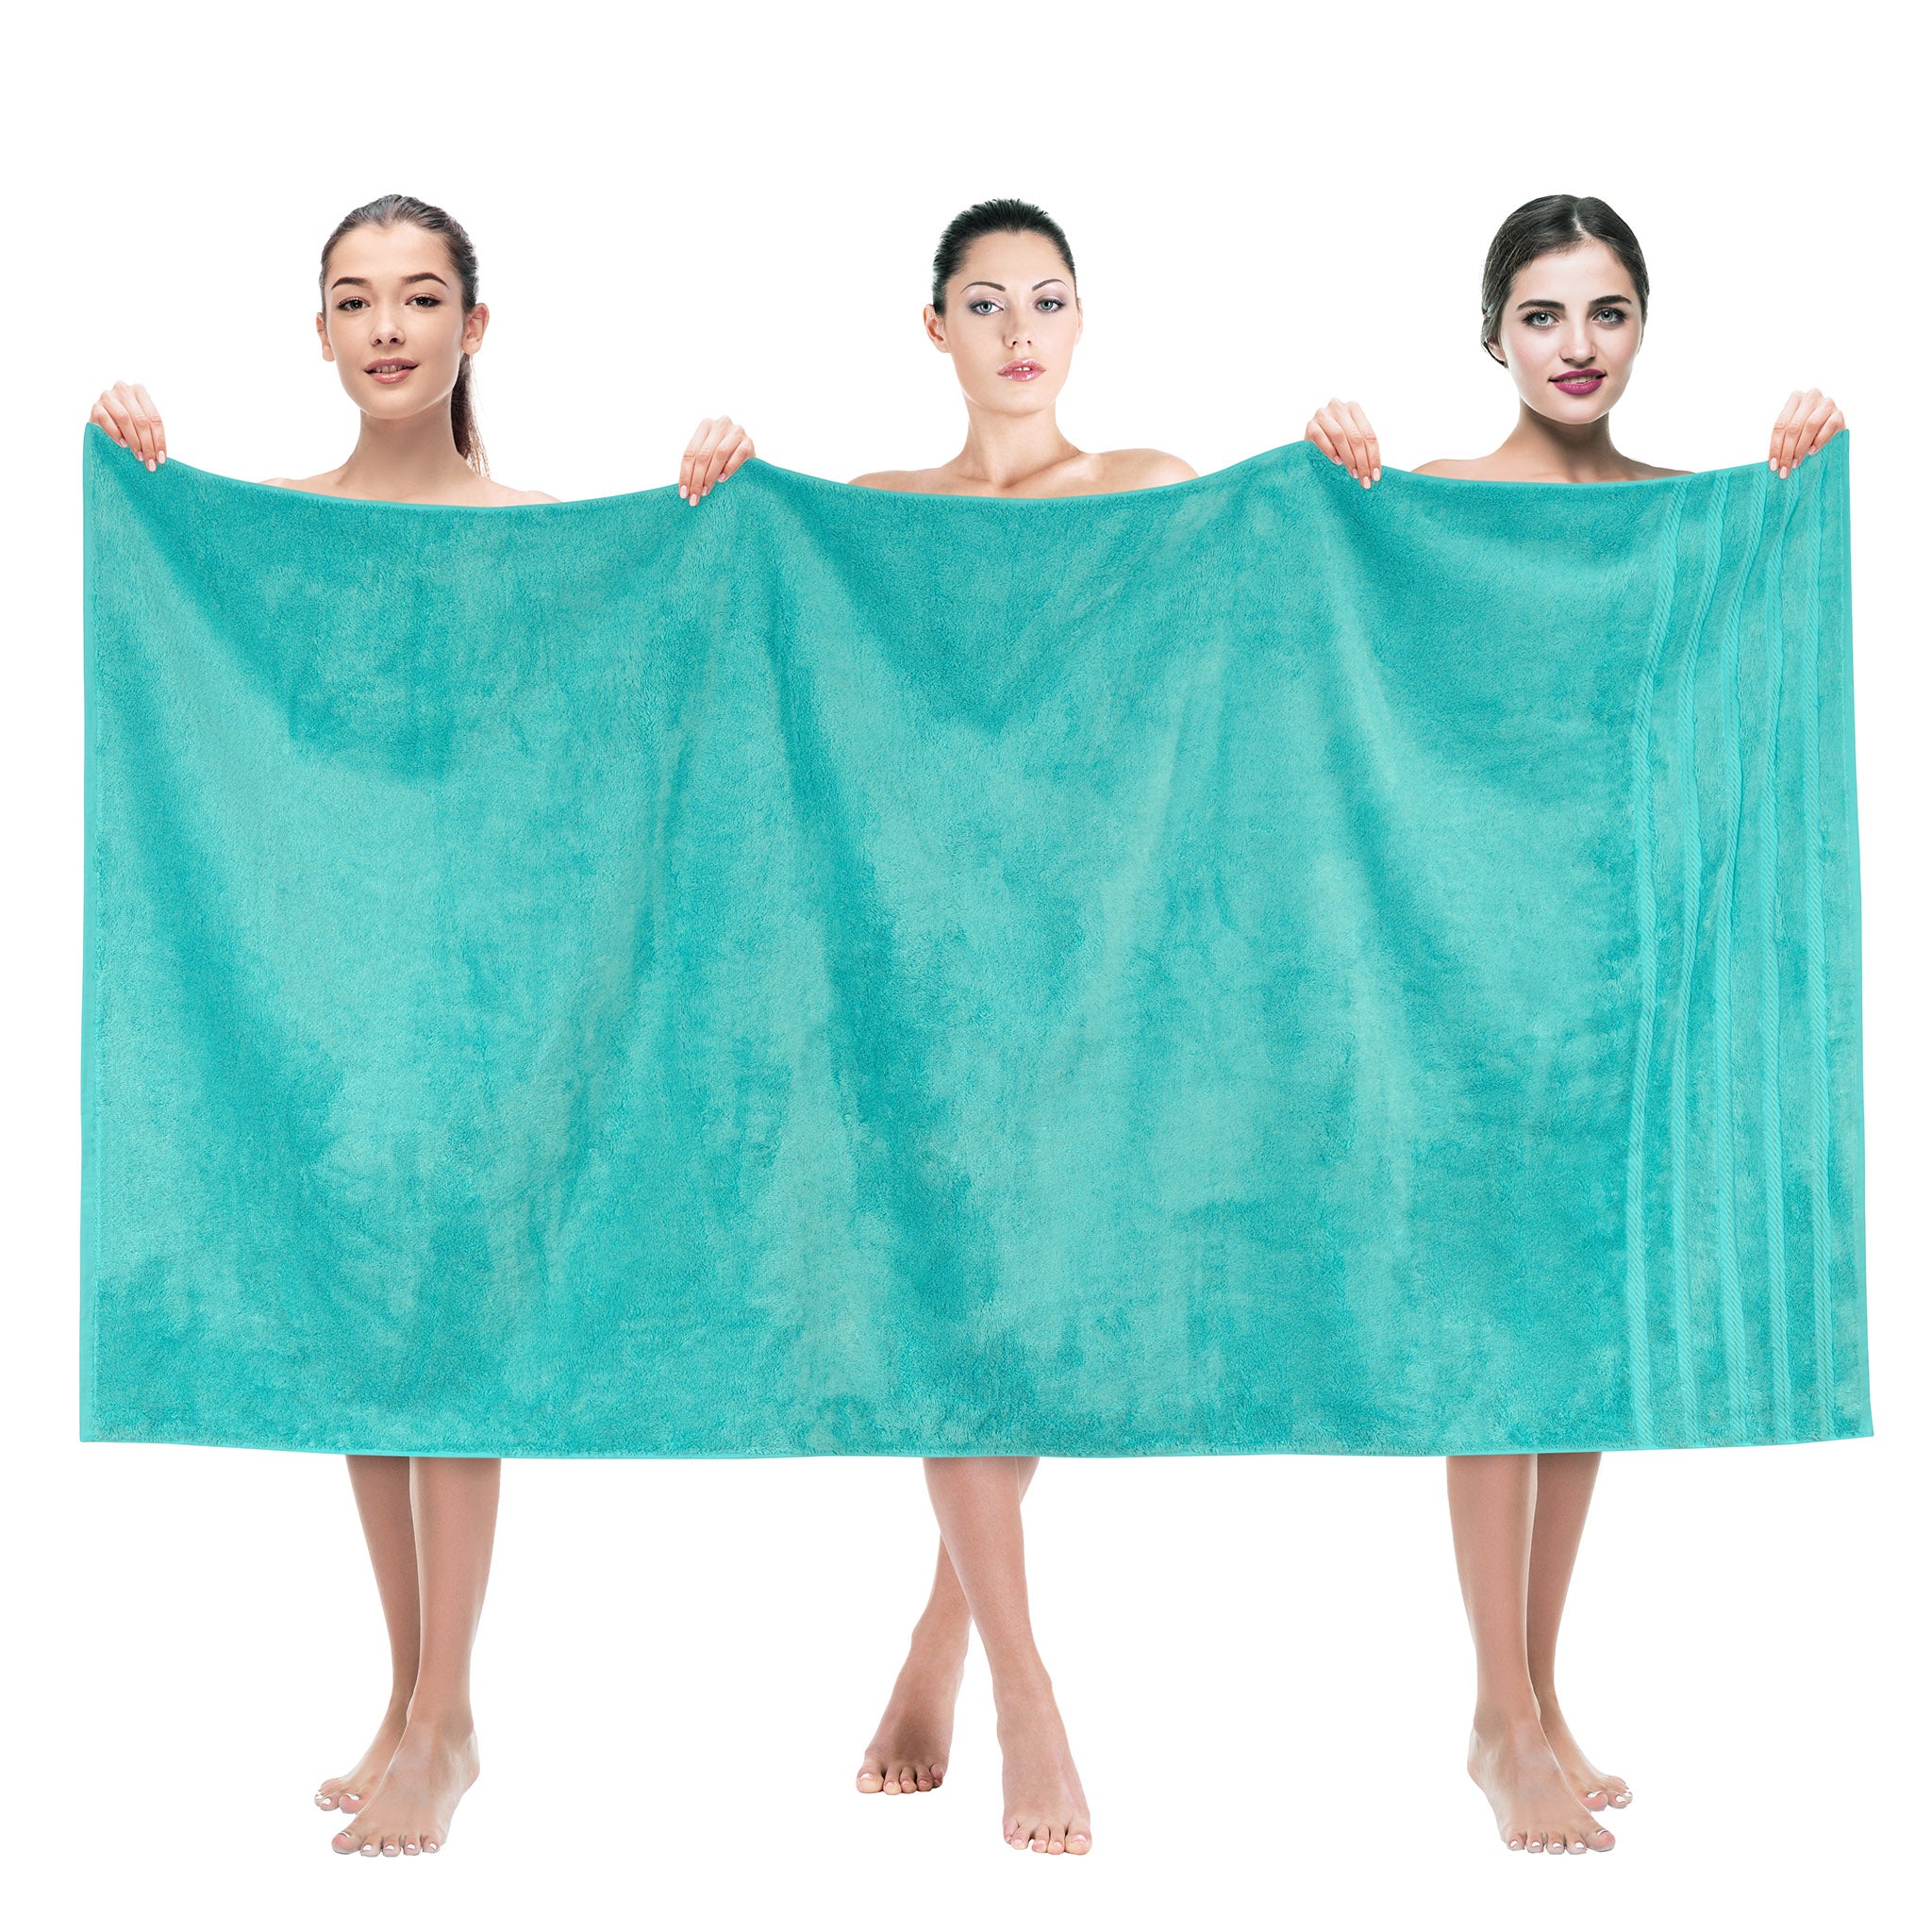 Belizzi Home Premium Cotton Oversized 2 Pack Bath Sheet 35x70 - 100% Pure  Cotton - Ideal for Everyday use - Ultra Soft & Highly Absorbent - Machine W  - Imported Products from USA - iBhejo